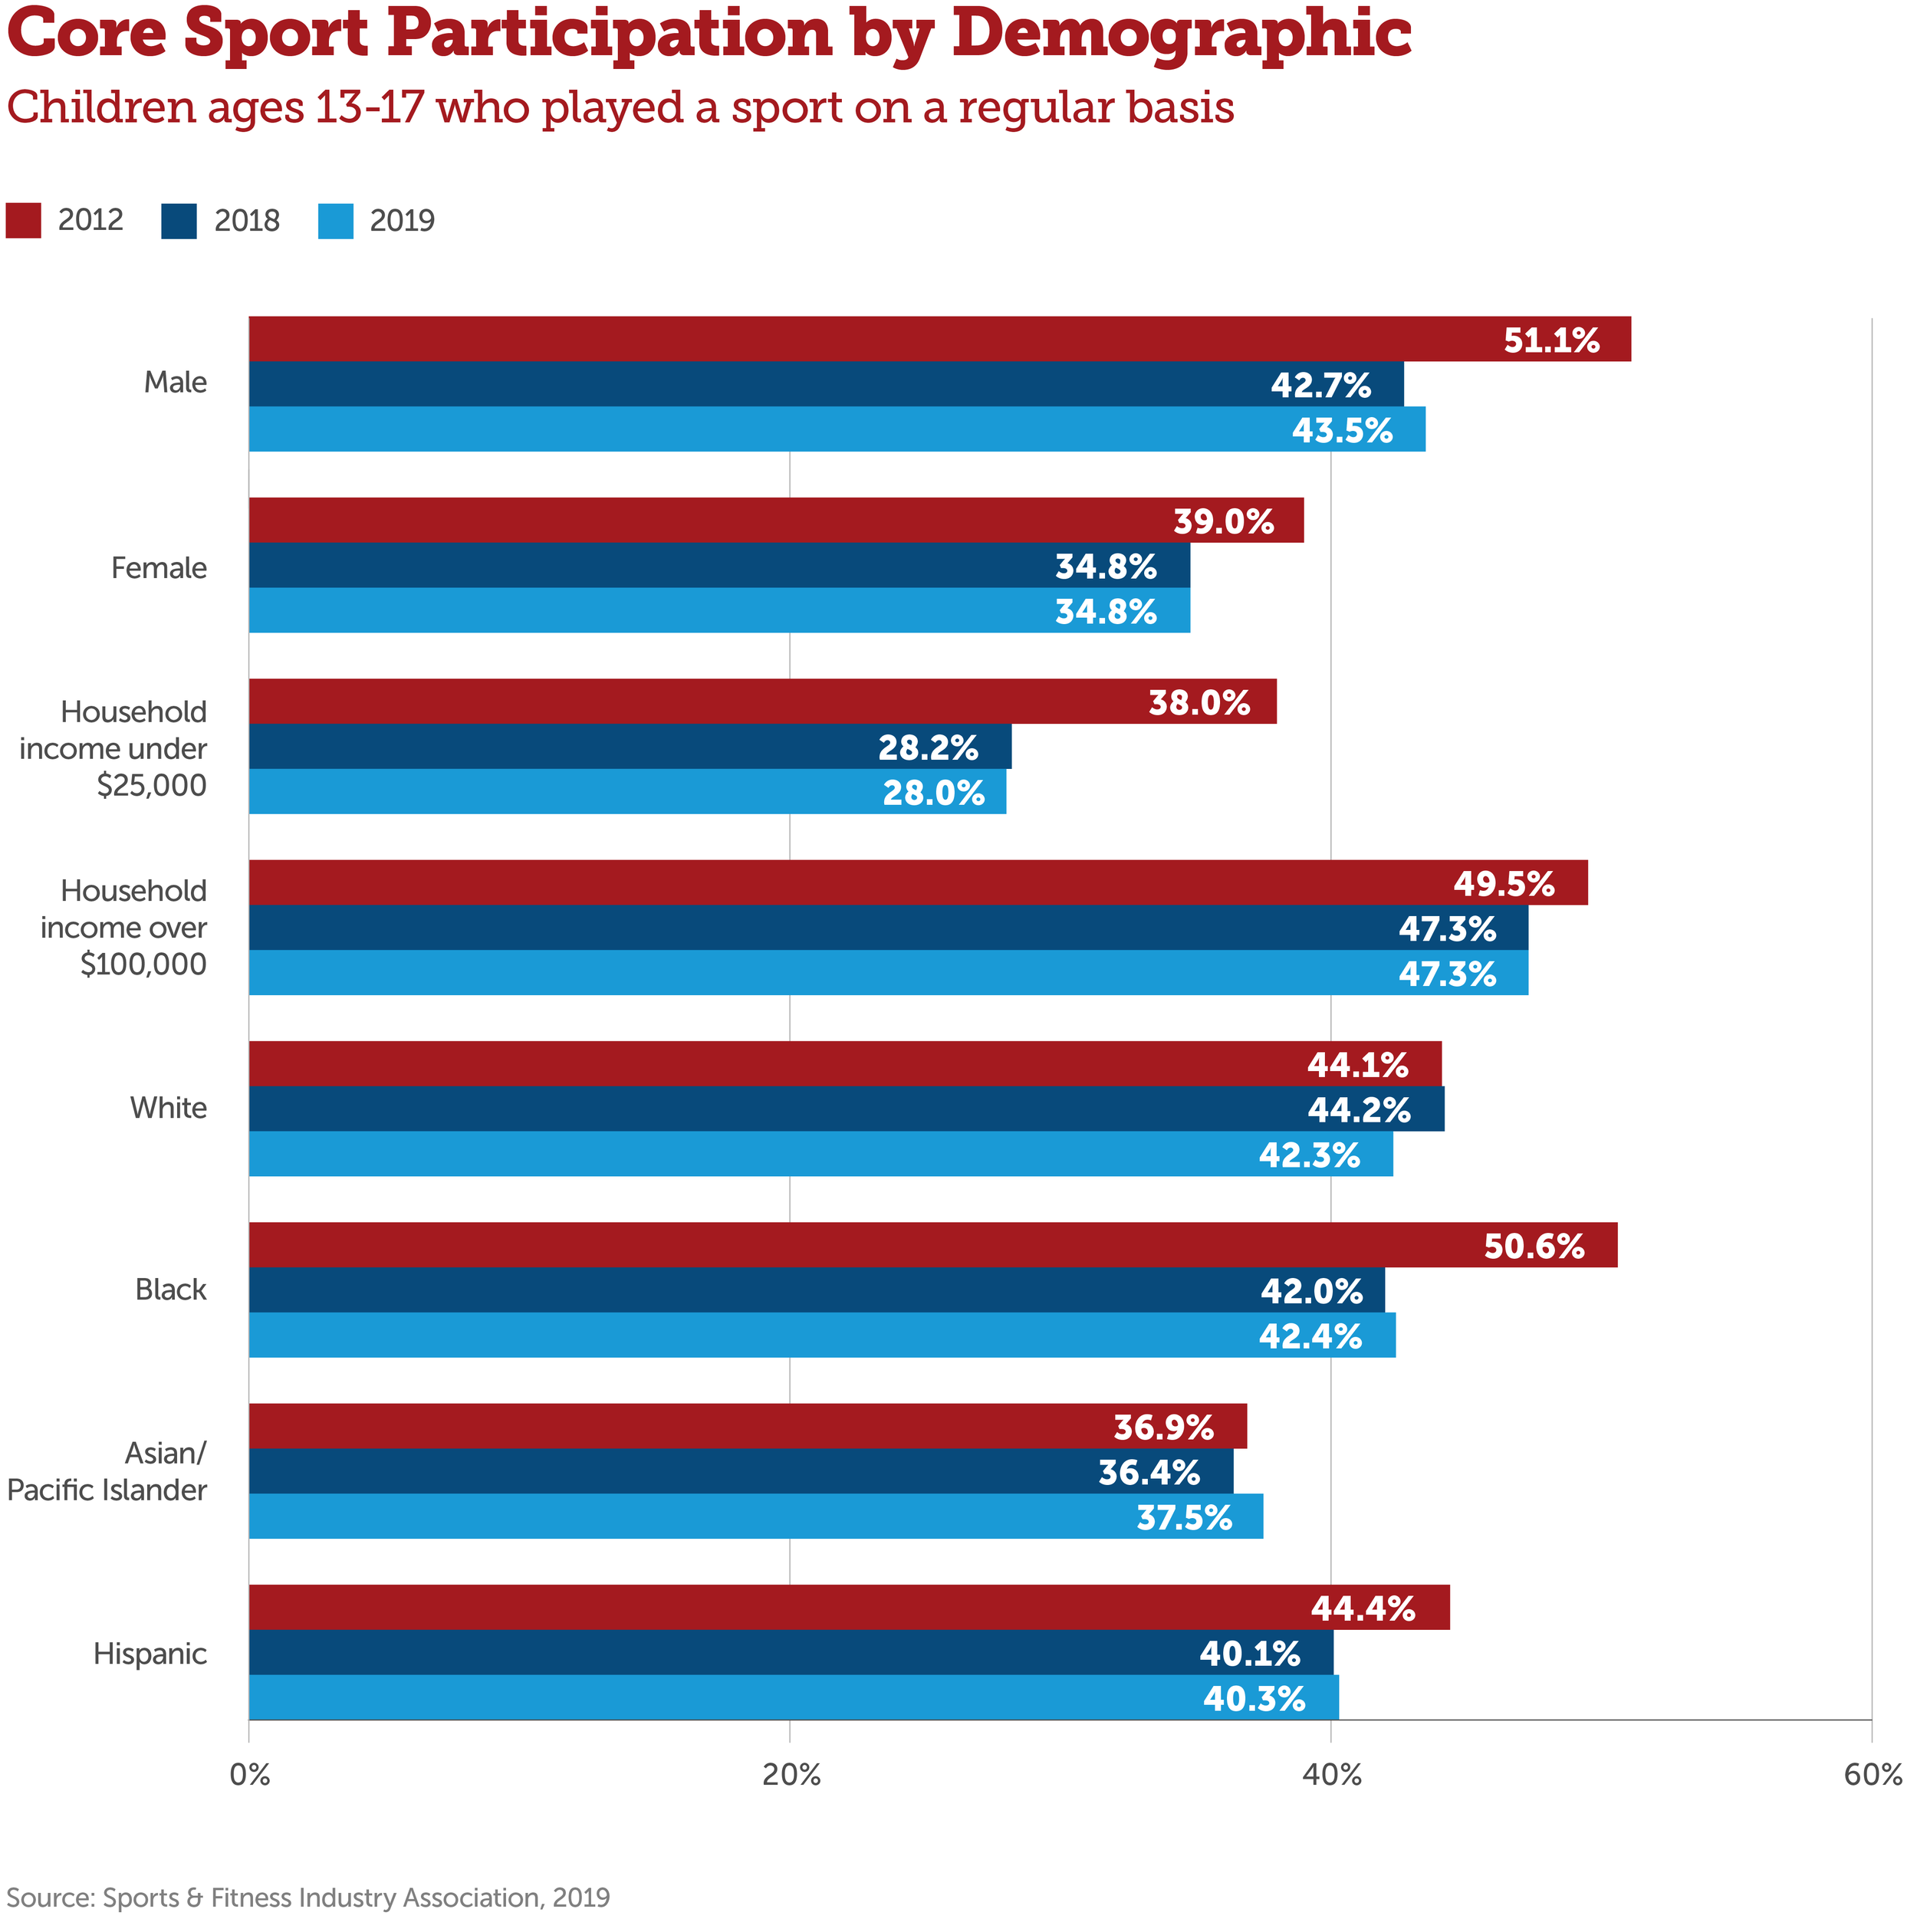 Poll: Many adults played sports when young, but few still play